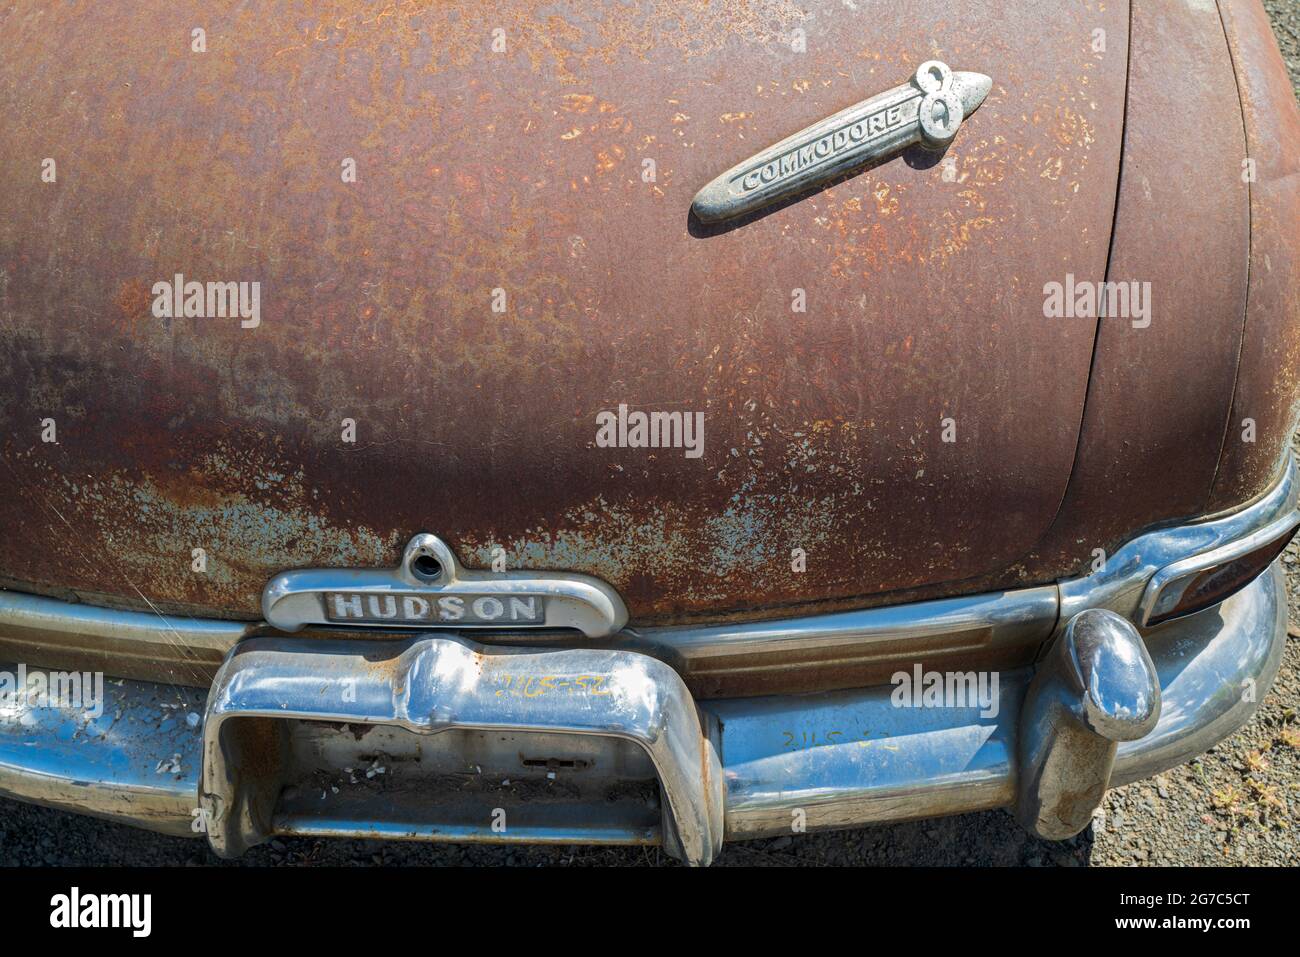 The trunk of a 1952 Hudson Commodore 8 car parked in Pomeroy, Washington, USA Stock Photo